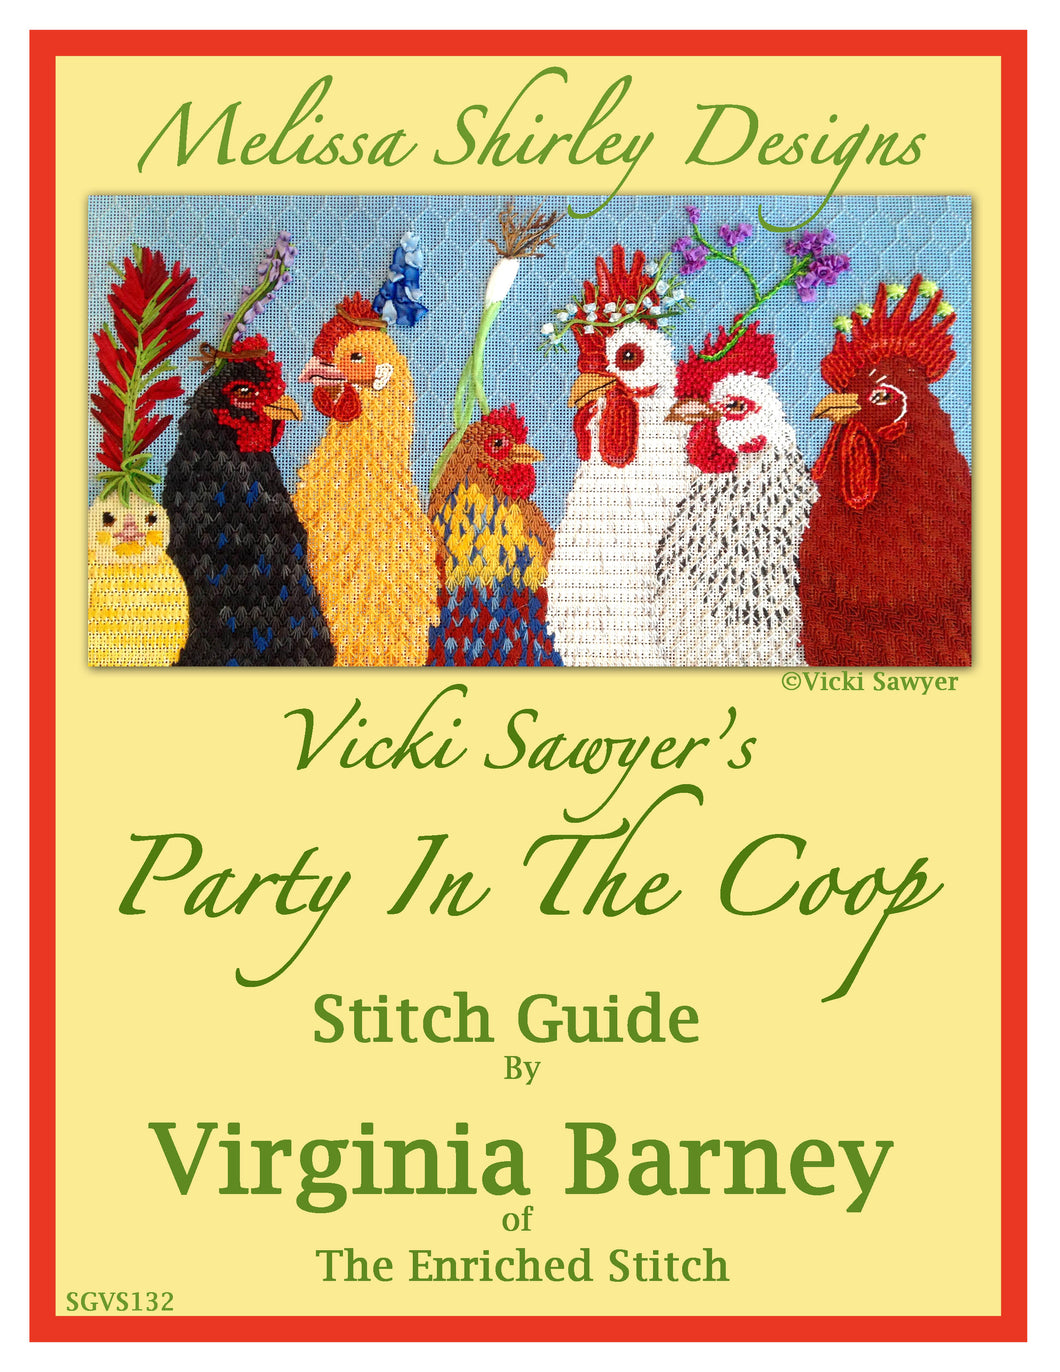 Stitch Guide for Melissa Shirley & Vicky Sawyer Party in the Coop